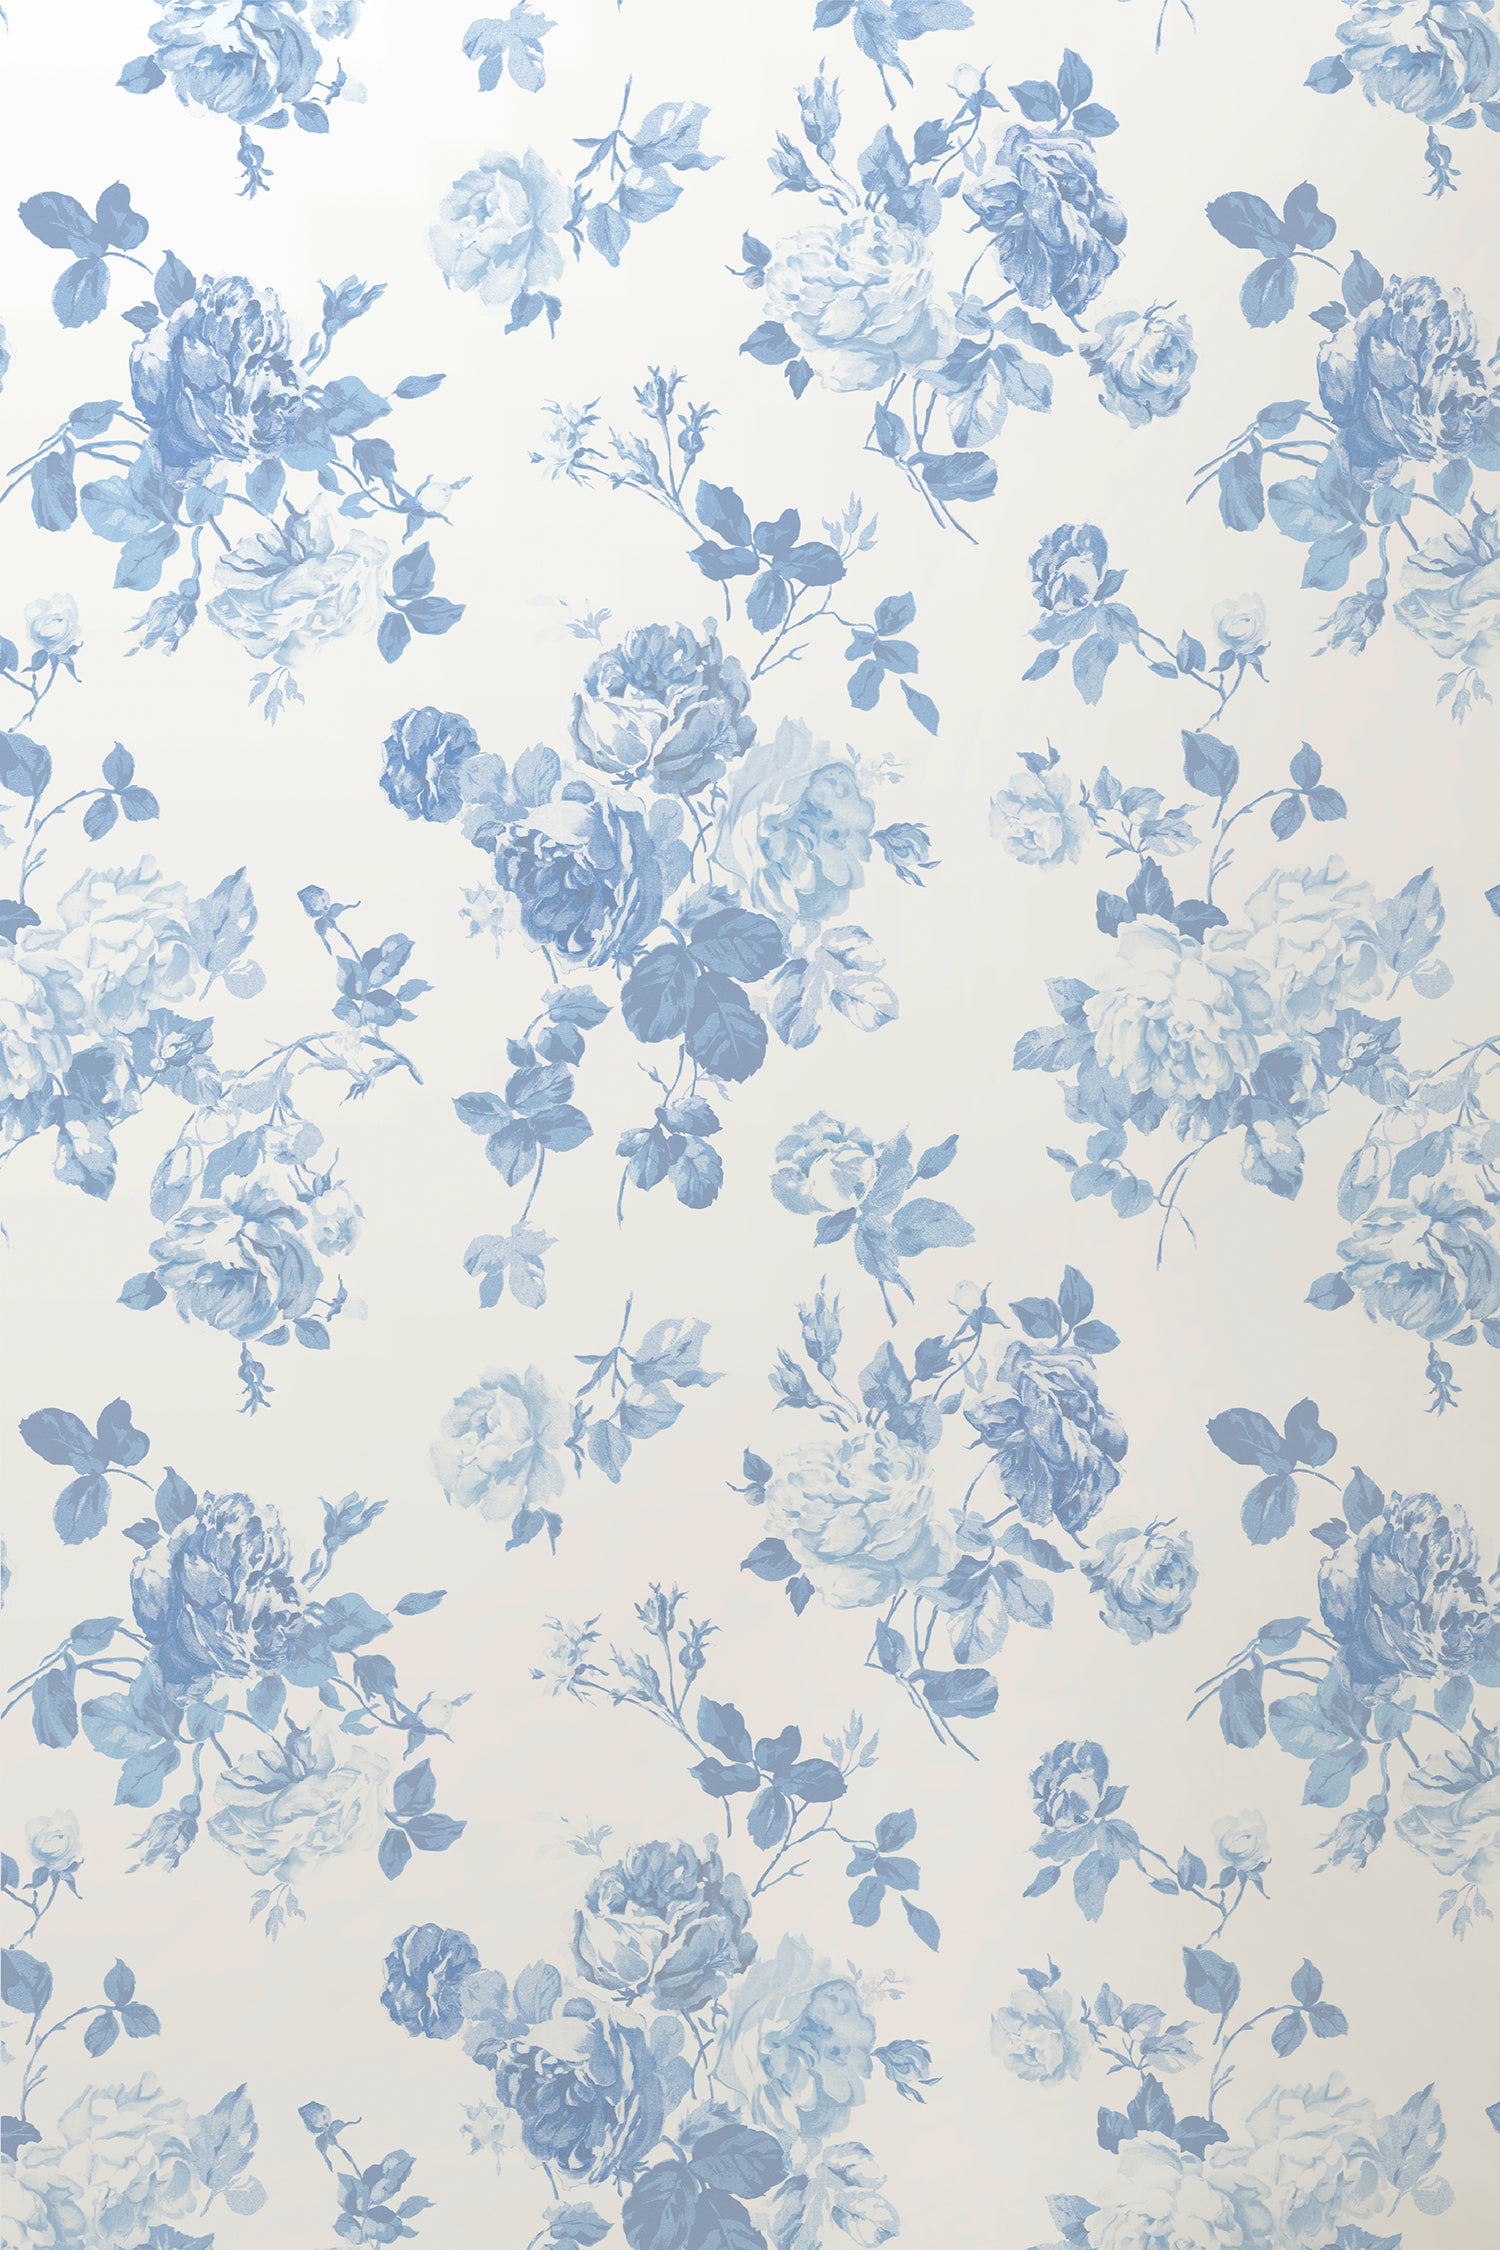 Everblooming Rosettes Wallpaper